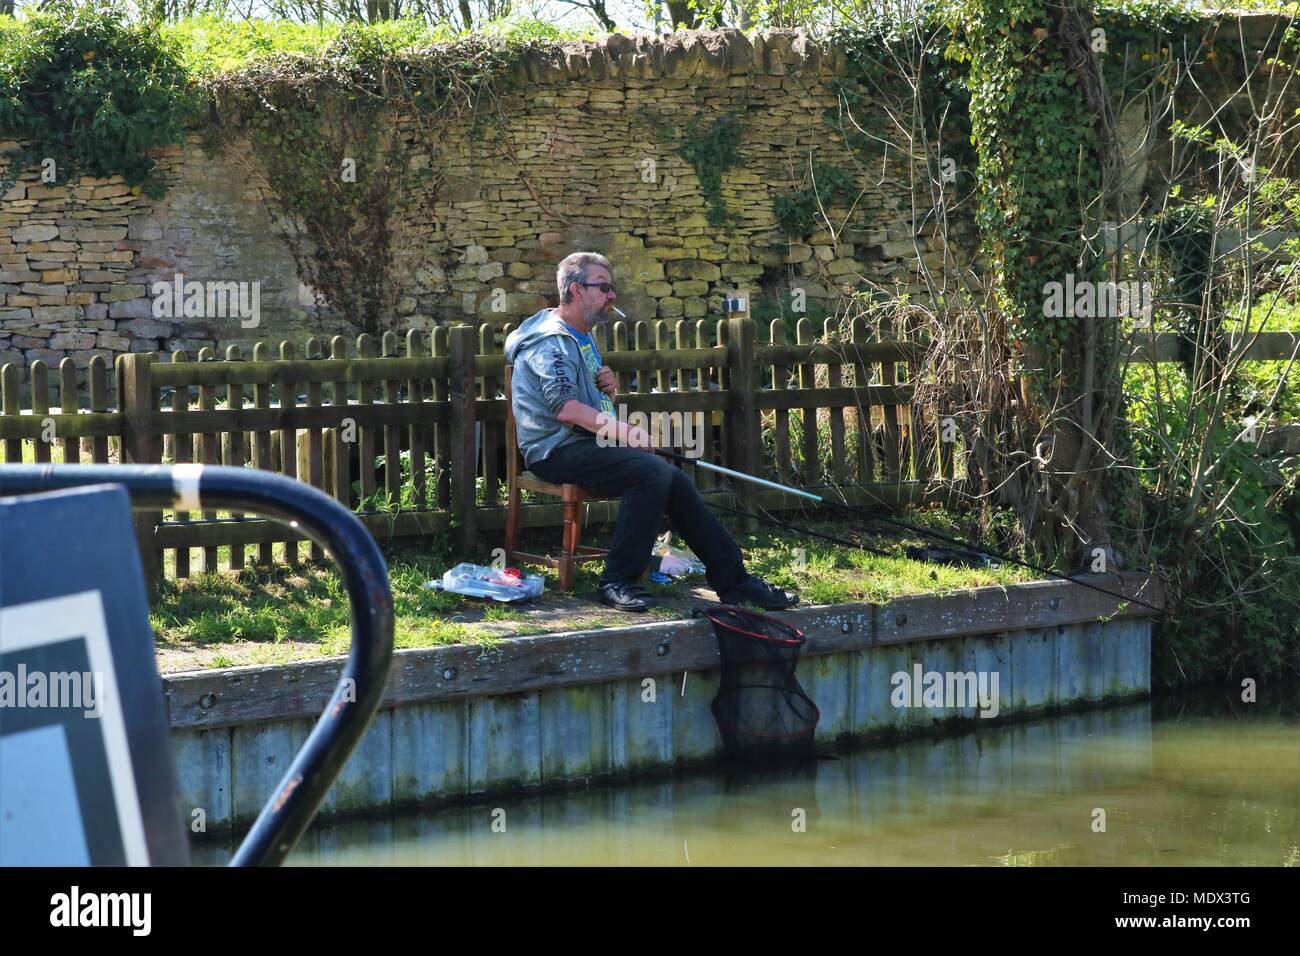 White middle aged man with cigarette in mouth fishing at the side of canal in the sunshine at Enslow Wharf, Bletchingdon, Oxfordshire Stock Photo